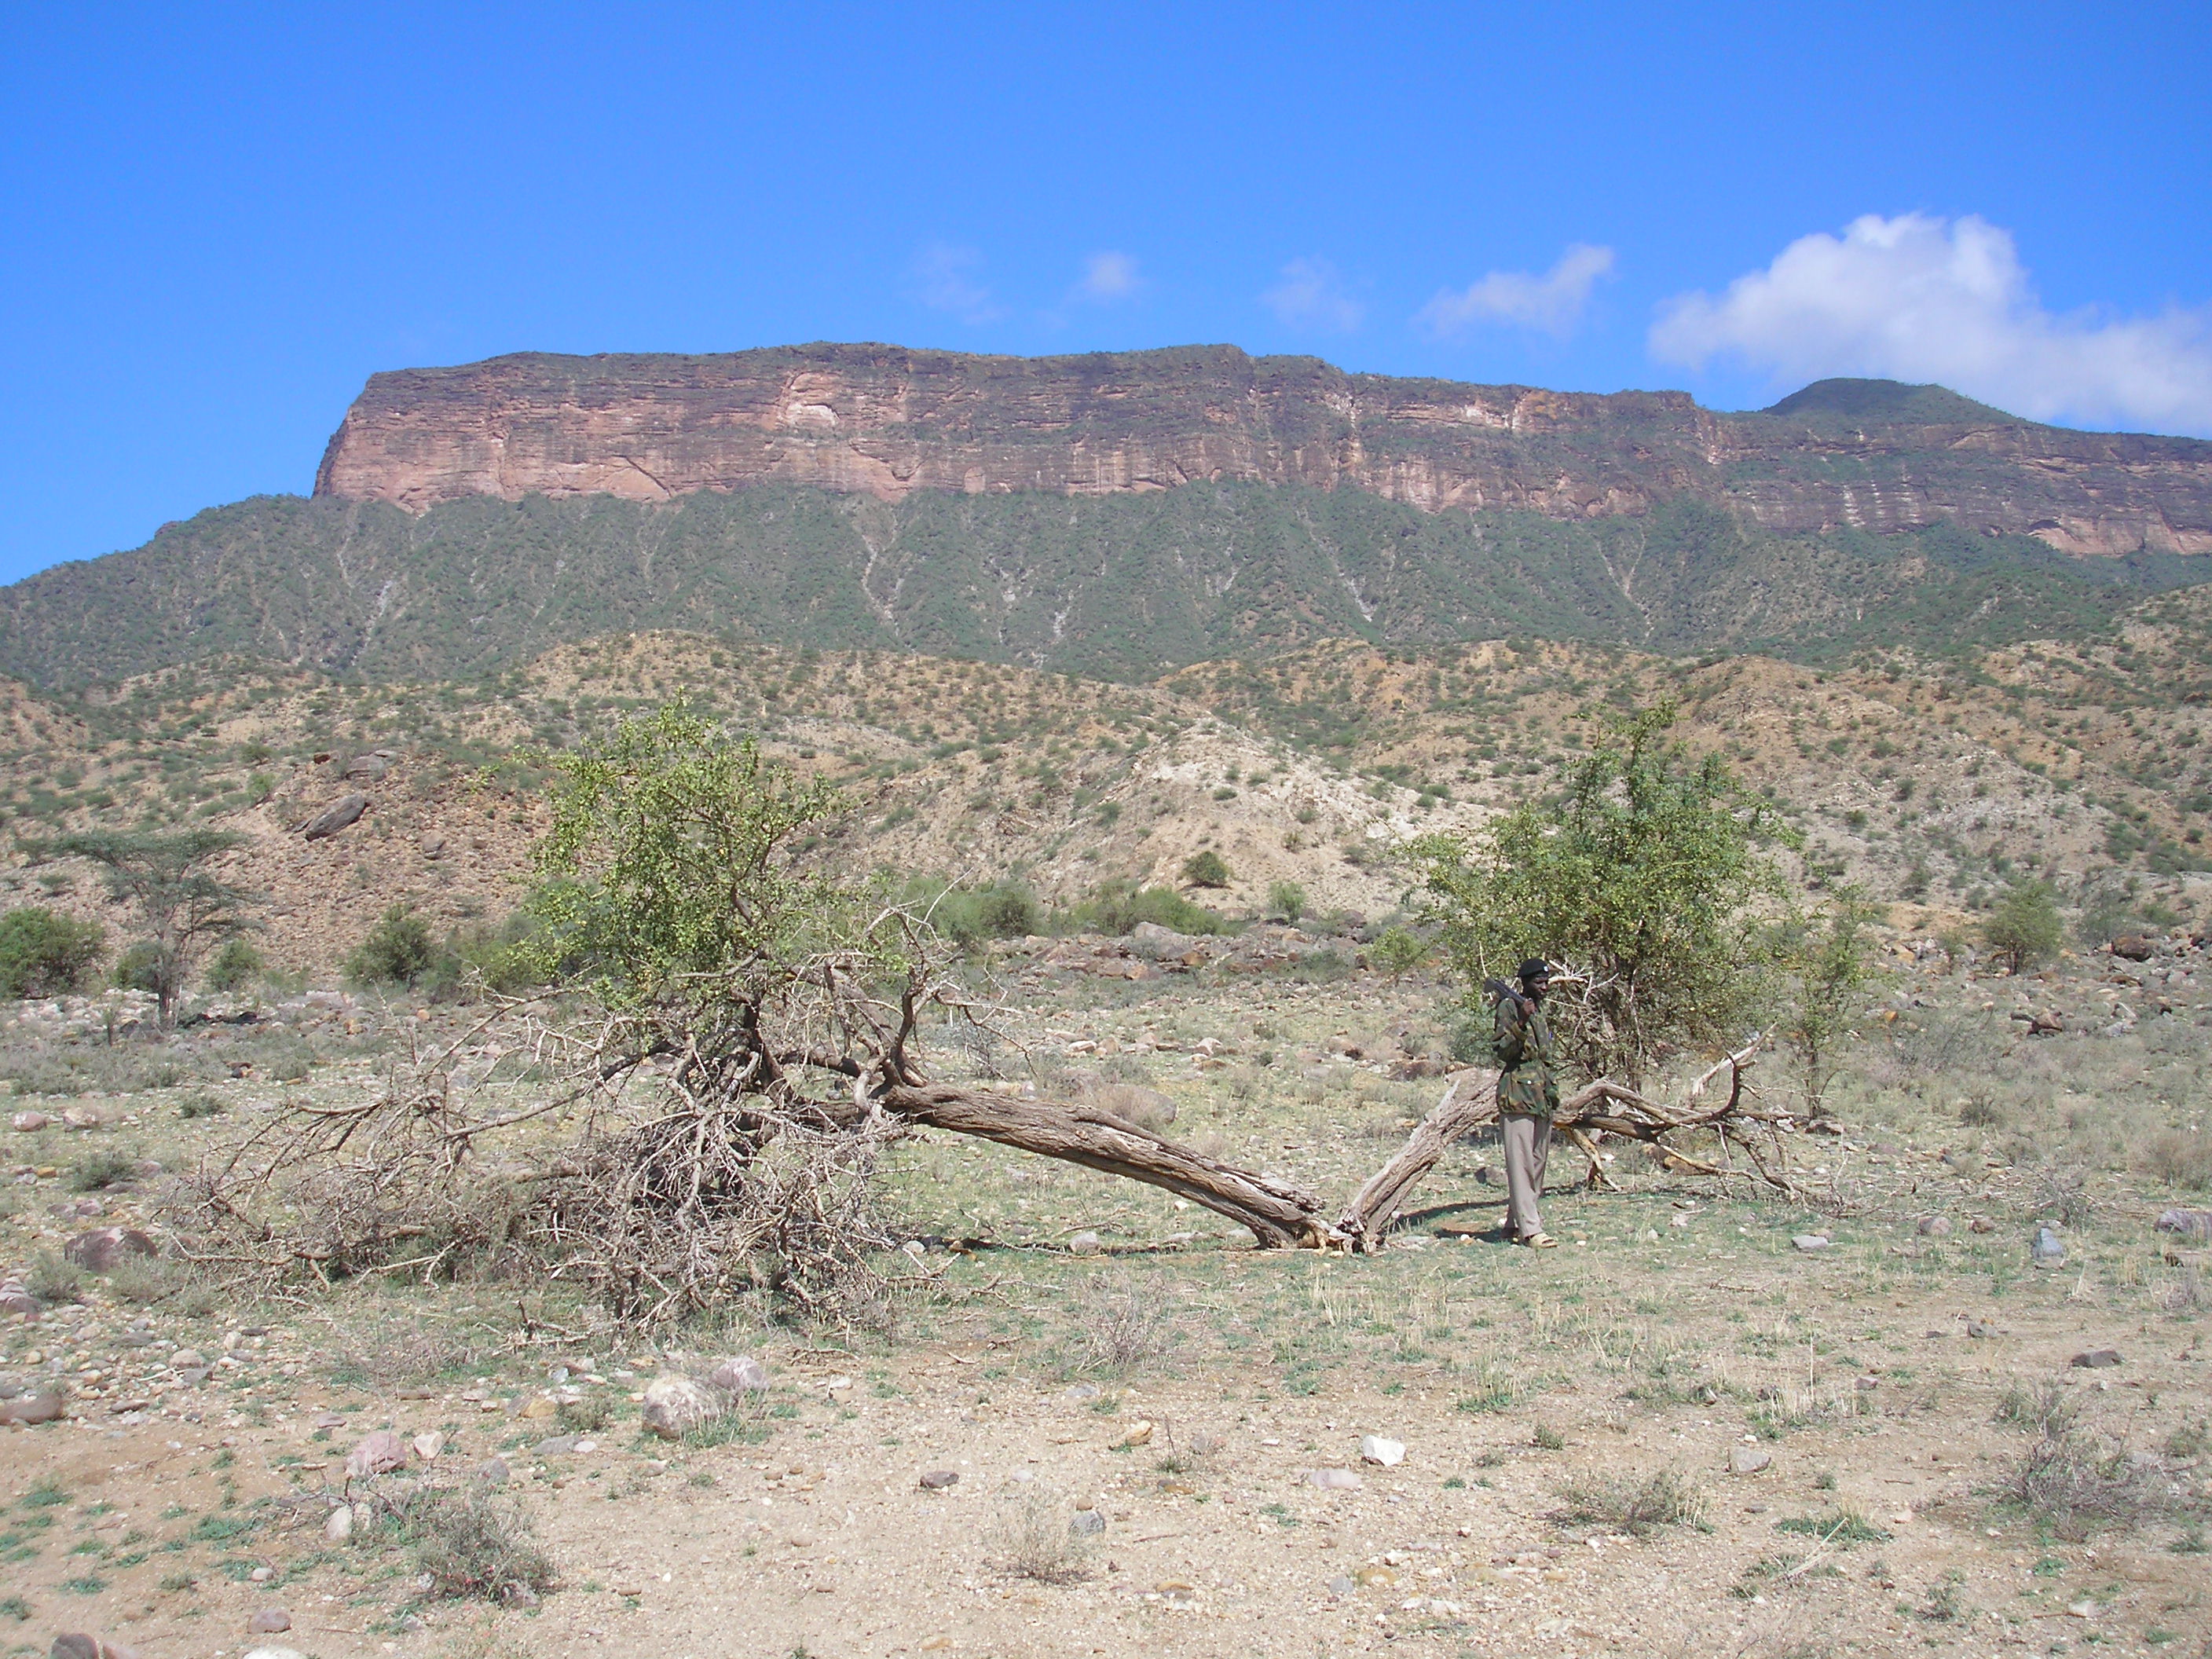 Prominent Topographical Feature of the North Tukana Area of Kenya